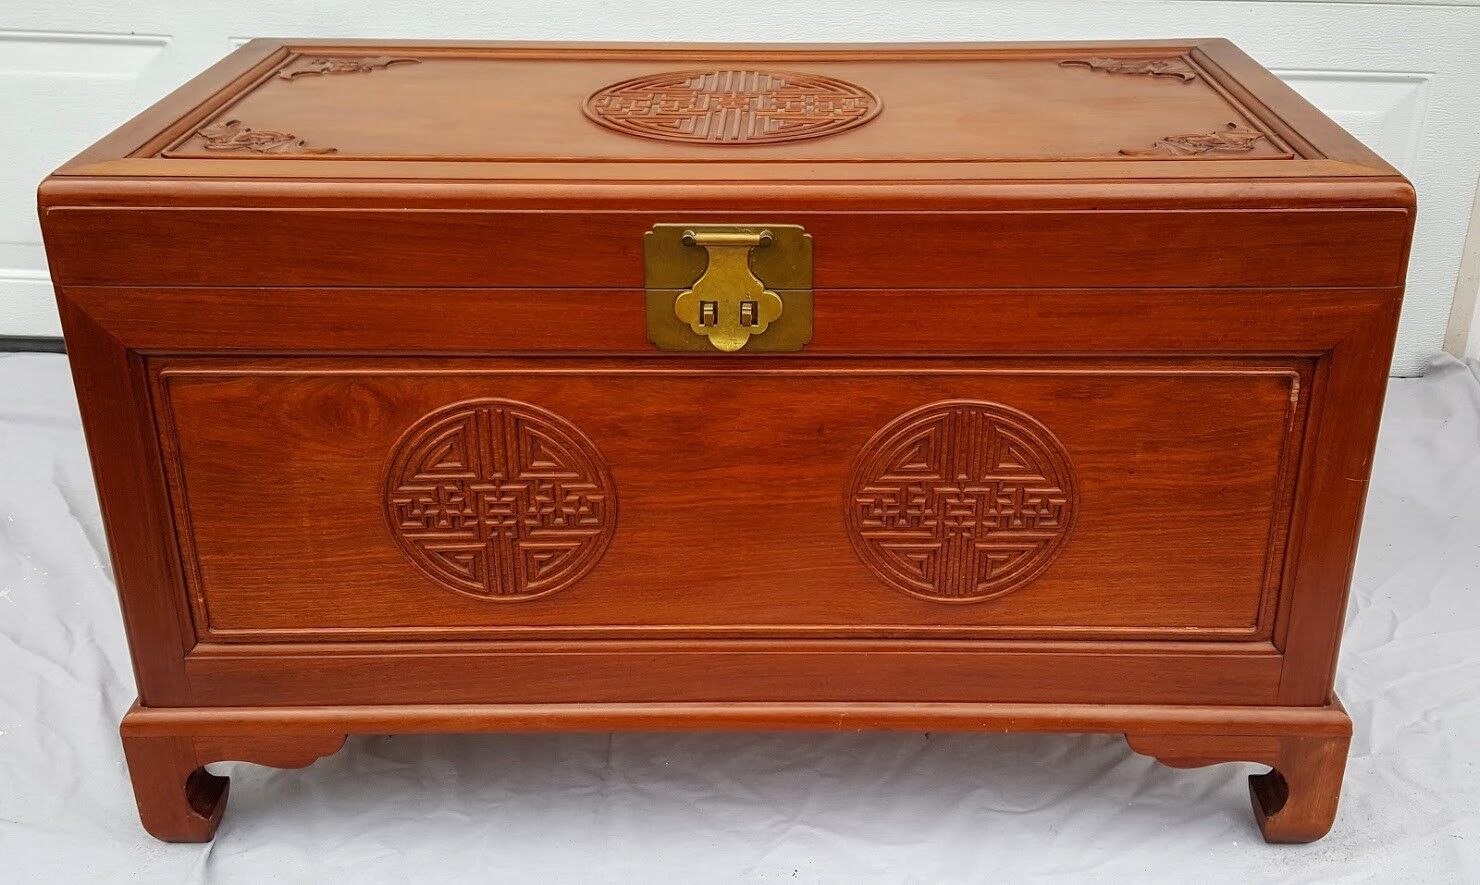 Fine Antique Chinese Rosewood Carved Trunk / Dowry Chest With Bats Camphor Lined